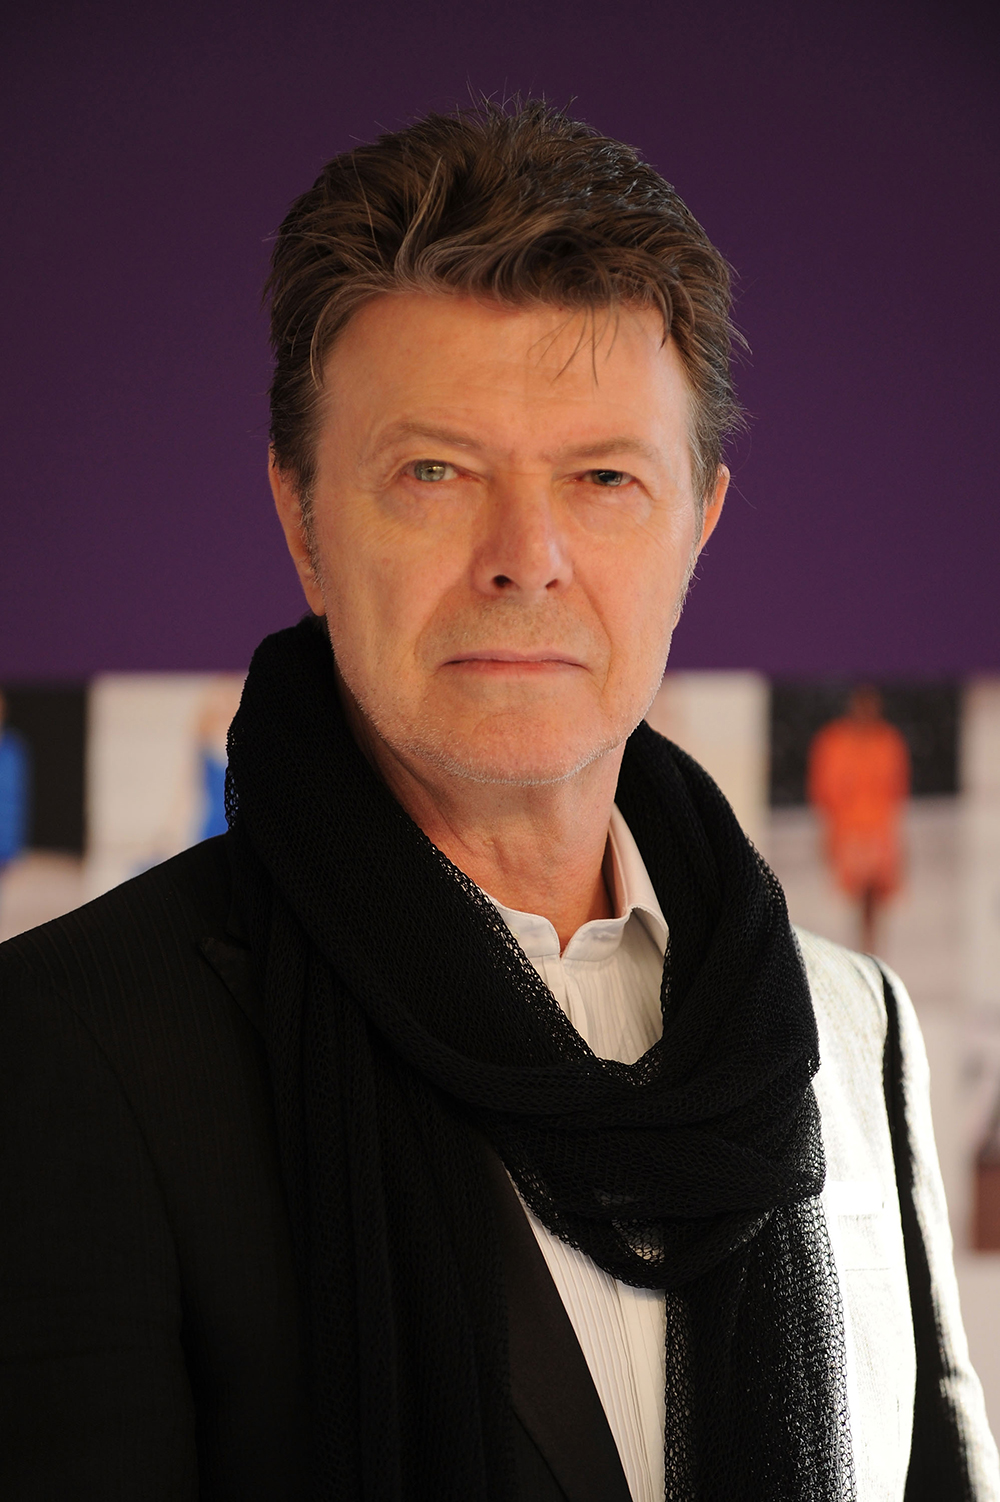 David Bowie attends the 2010 CFDA Fashion Awards.